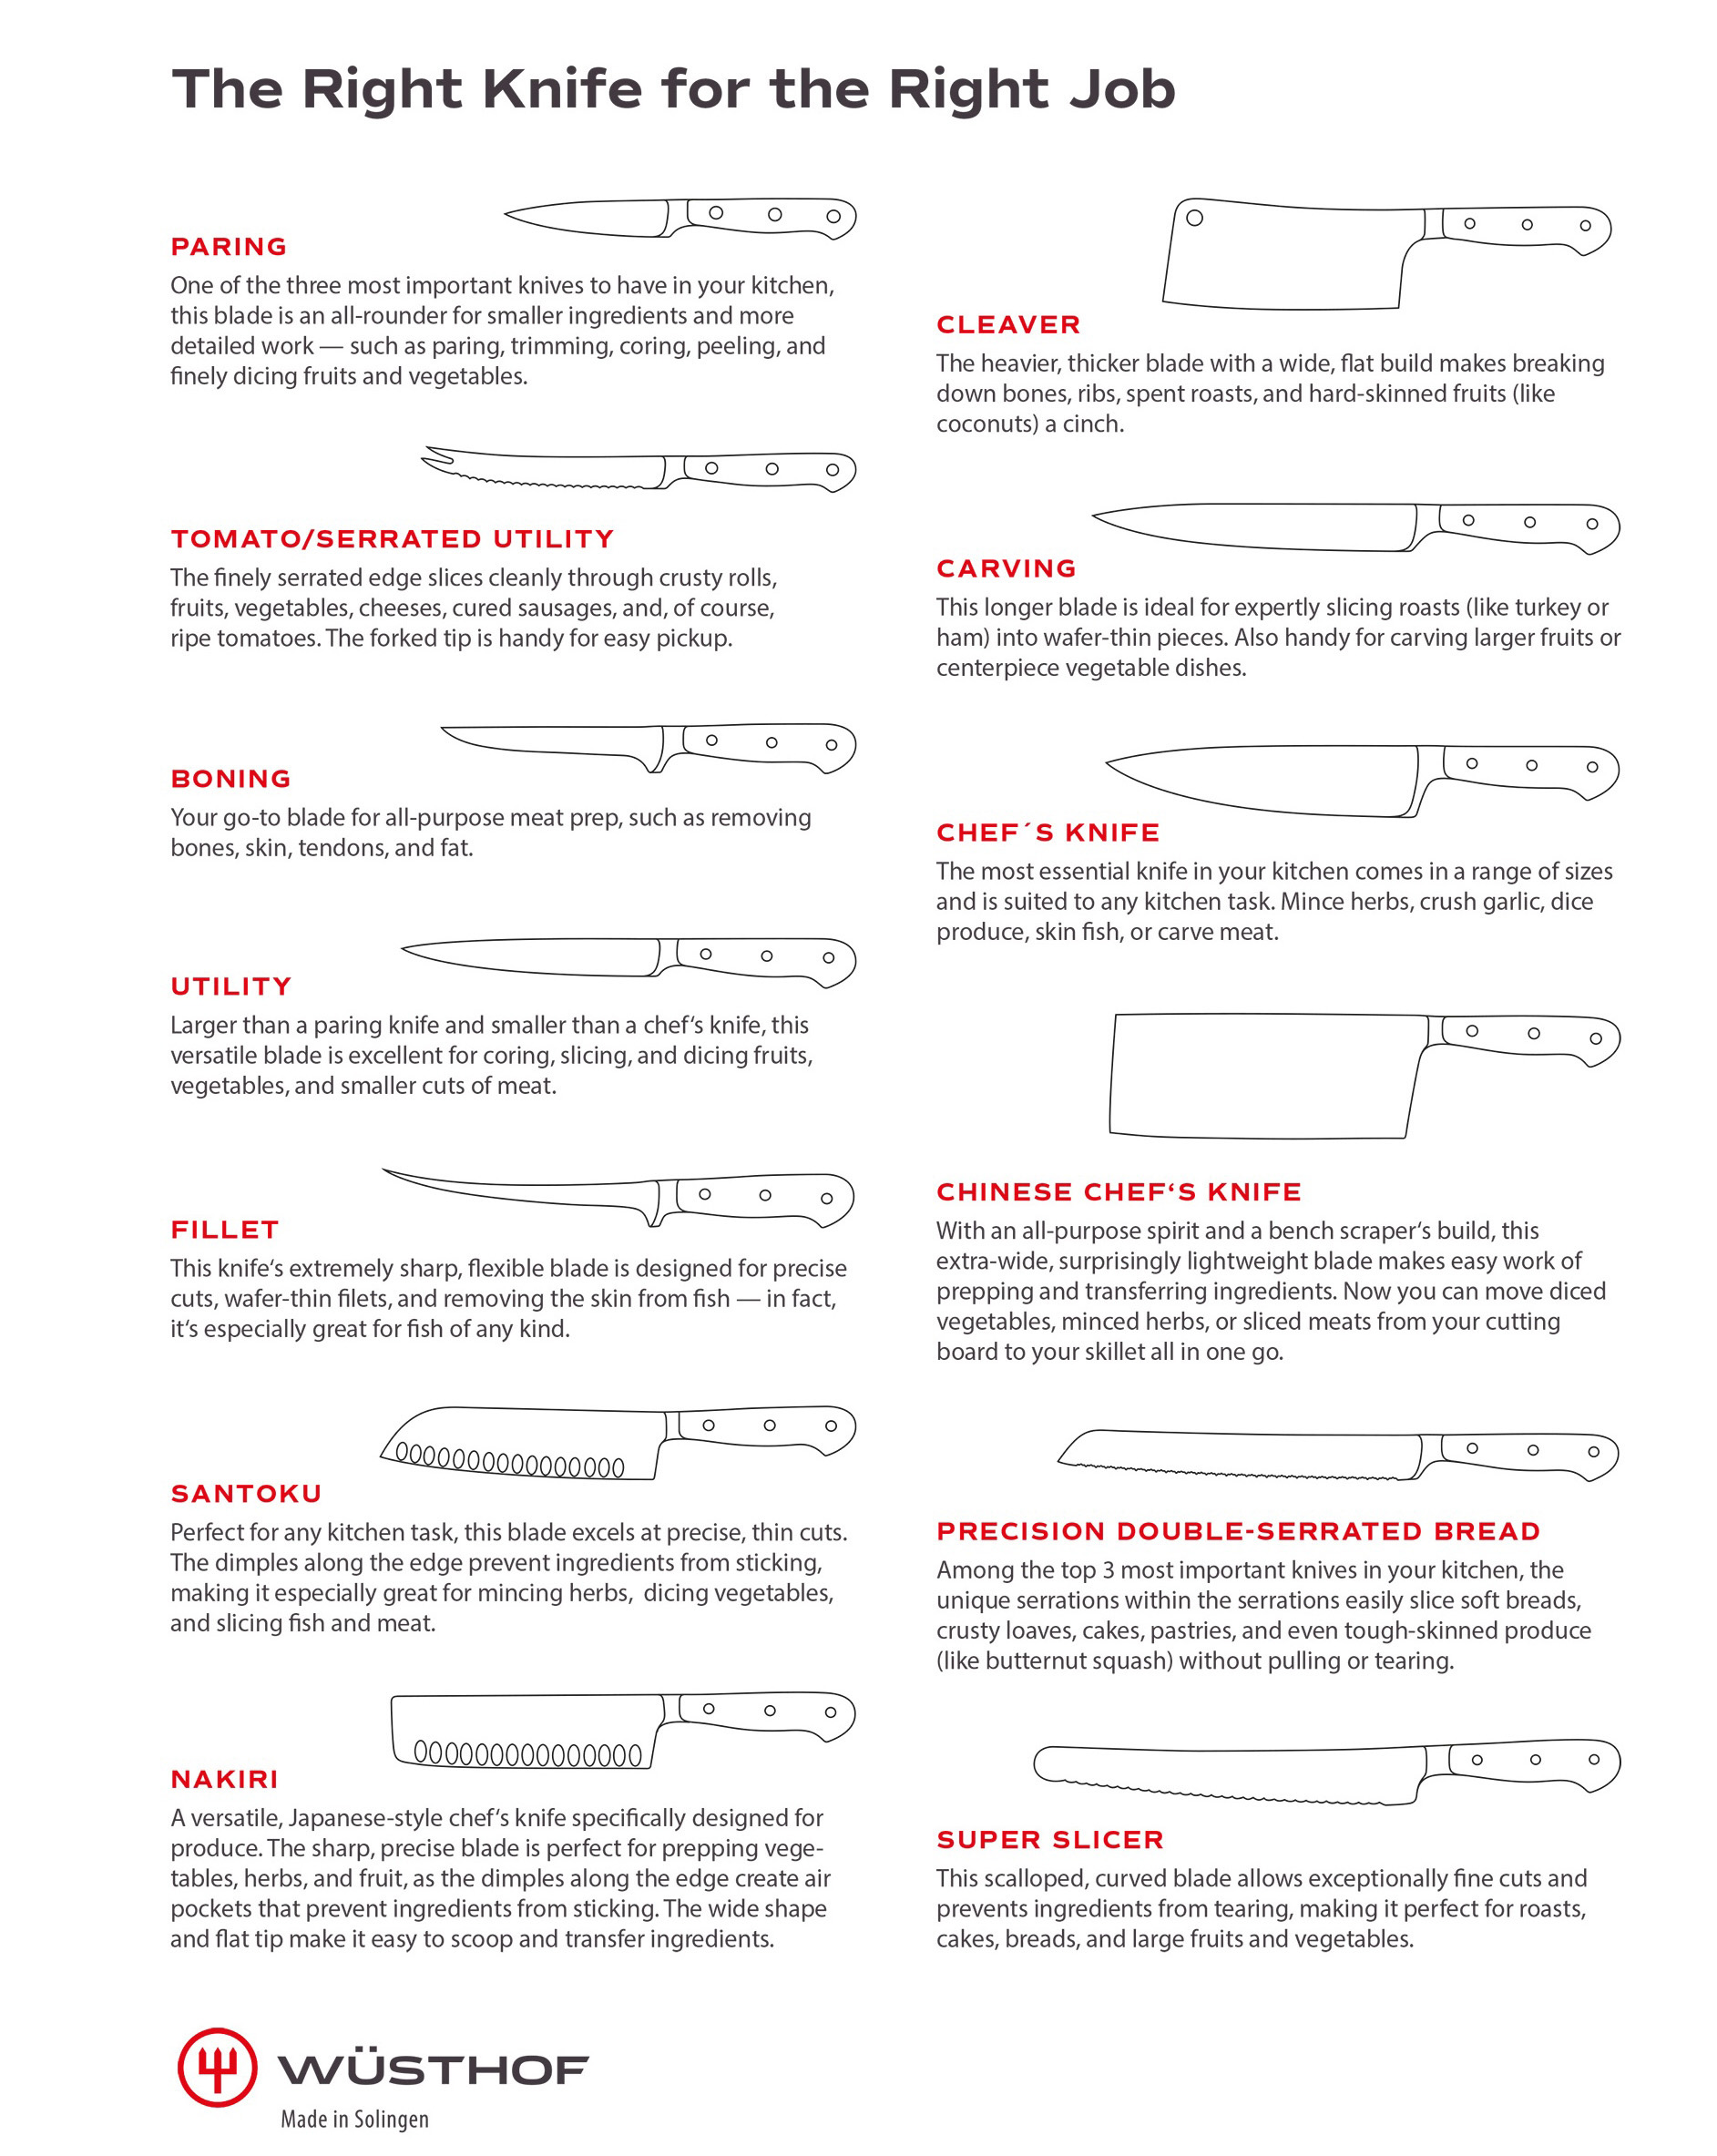 Chart for Choosing the Right Knife (from Wüsthof)